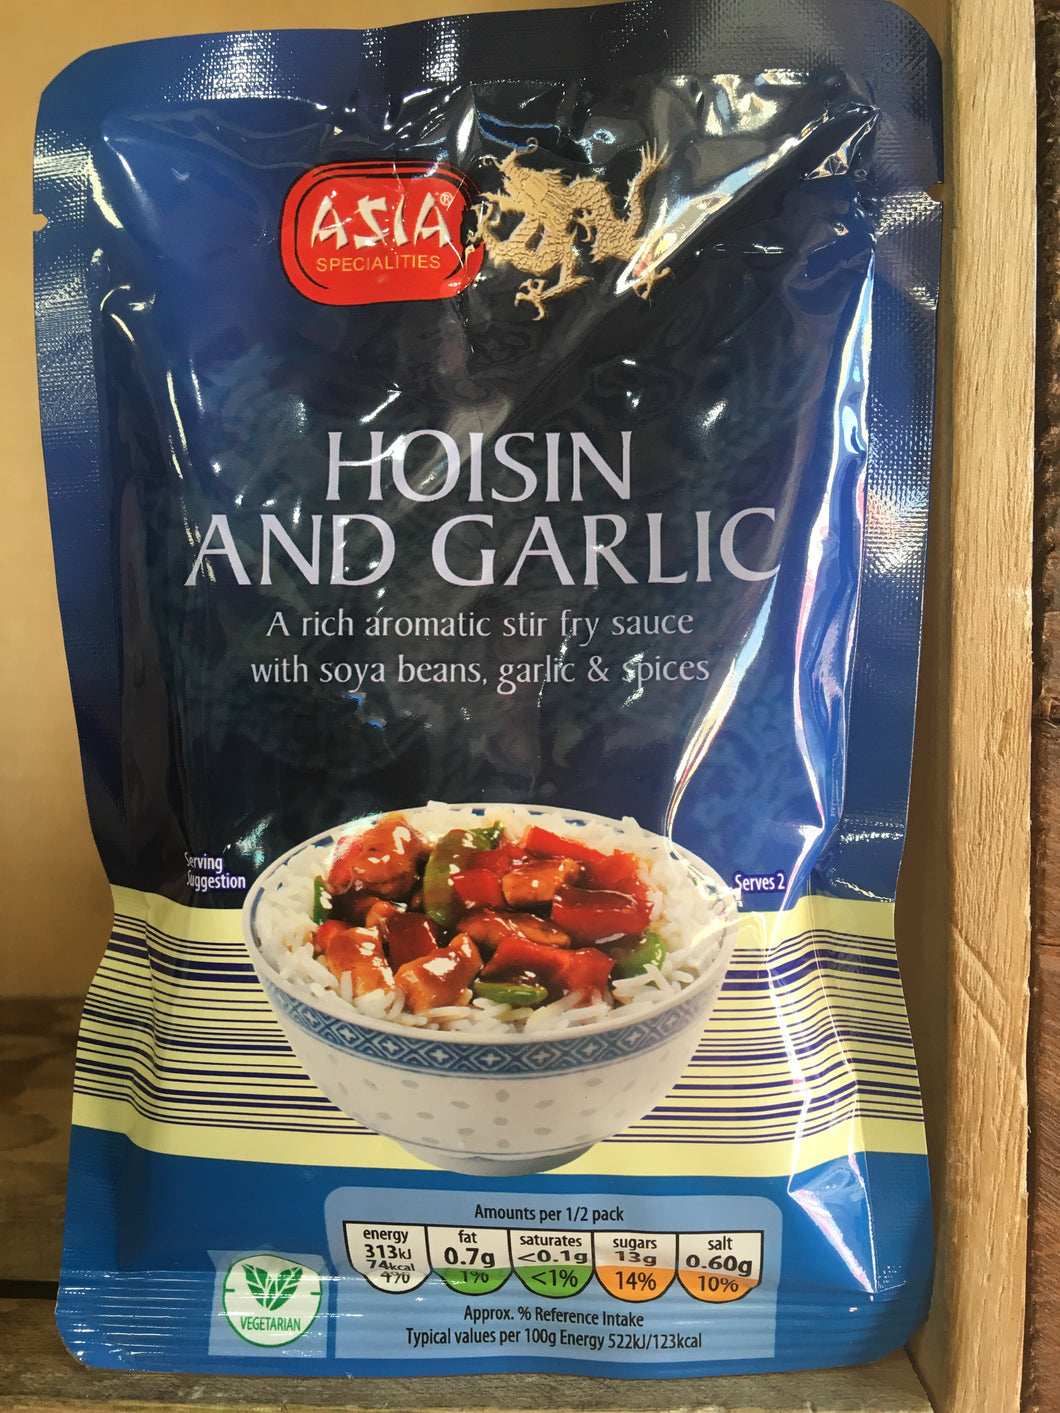 Asia Specialities Hoisin and Garlic Stir Fry Sauce (2 Servings) 120g